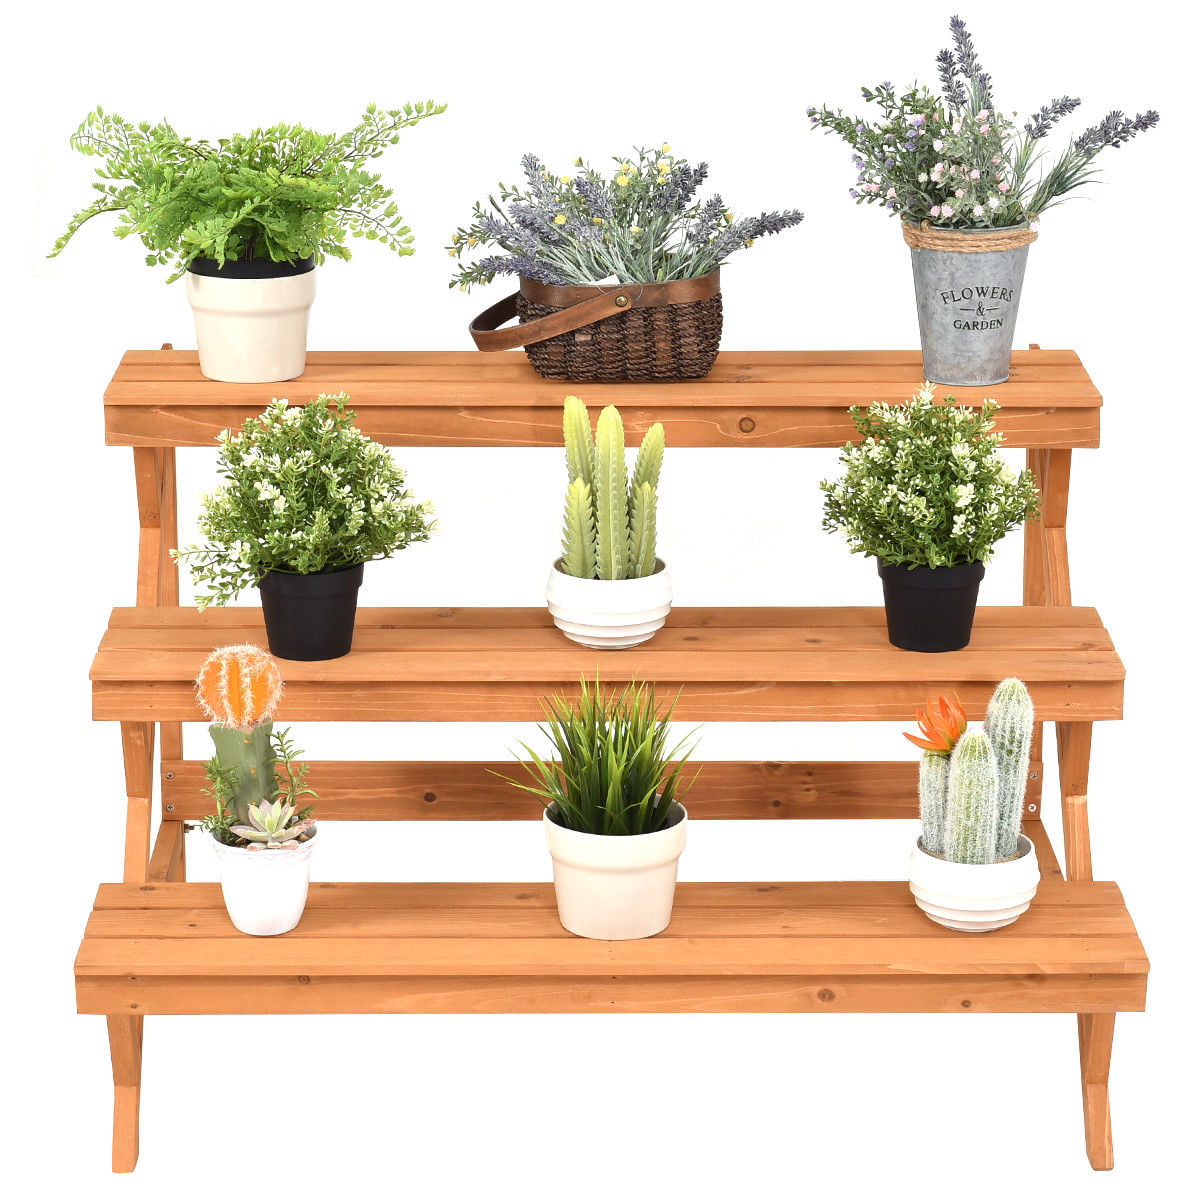 Funkeen Wood Plant Stand Indoor 4-Tier Foldable Plant Shelf Tall Flower Pot Holder Display Stand Outdoor Plant Ladder Corner Storage Shelves for Living Room Balcony Patio Garden 